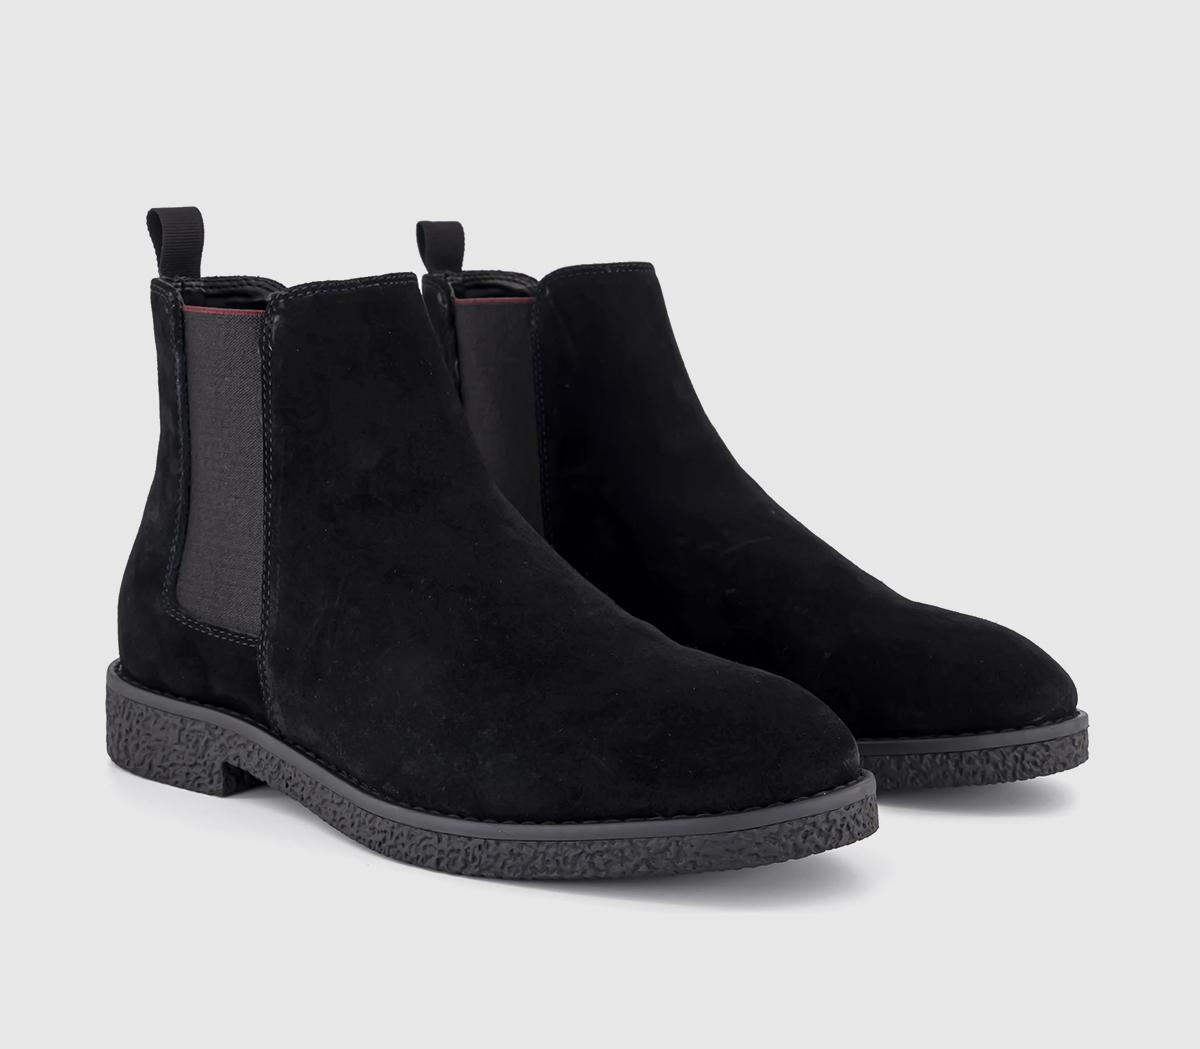 OFFICE Mens Bachelor Crepe Look Chelsea Boots Black Suede, 10